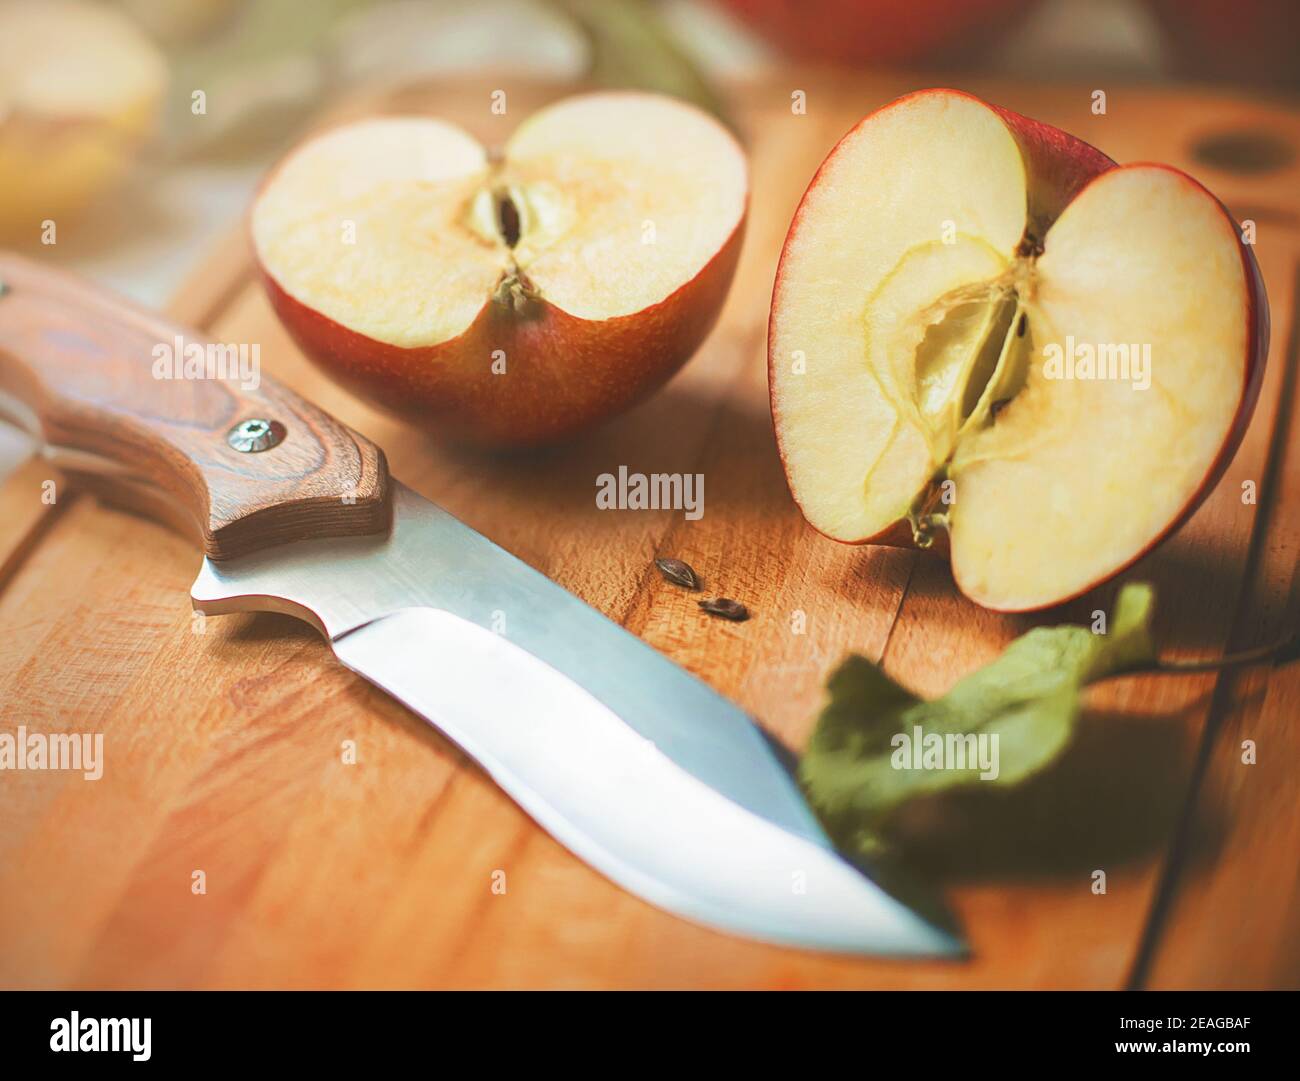 A red ripe delicious juicy apple was cut with a sharp knife and its halves lie on a wooden kitchen board, illuminated in sunlight on a summer day. Har Stock Photo